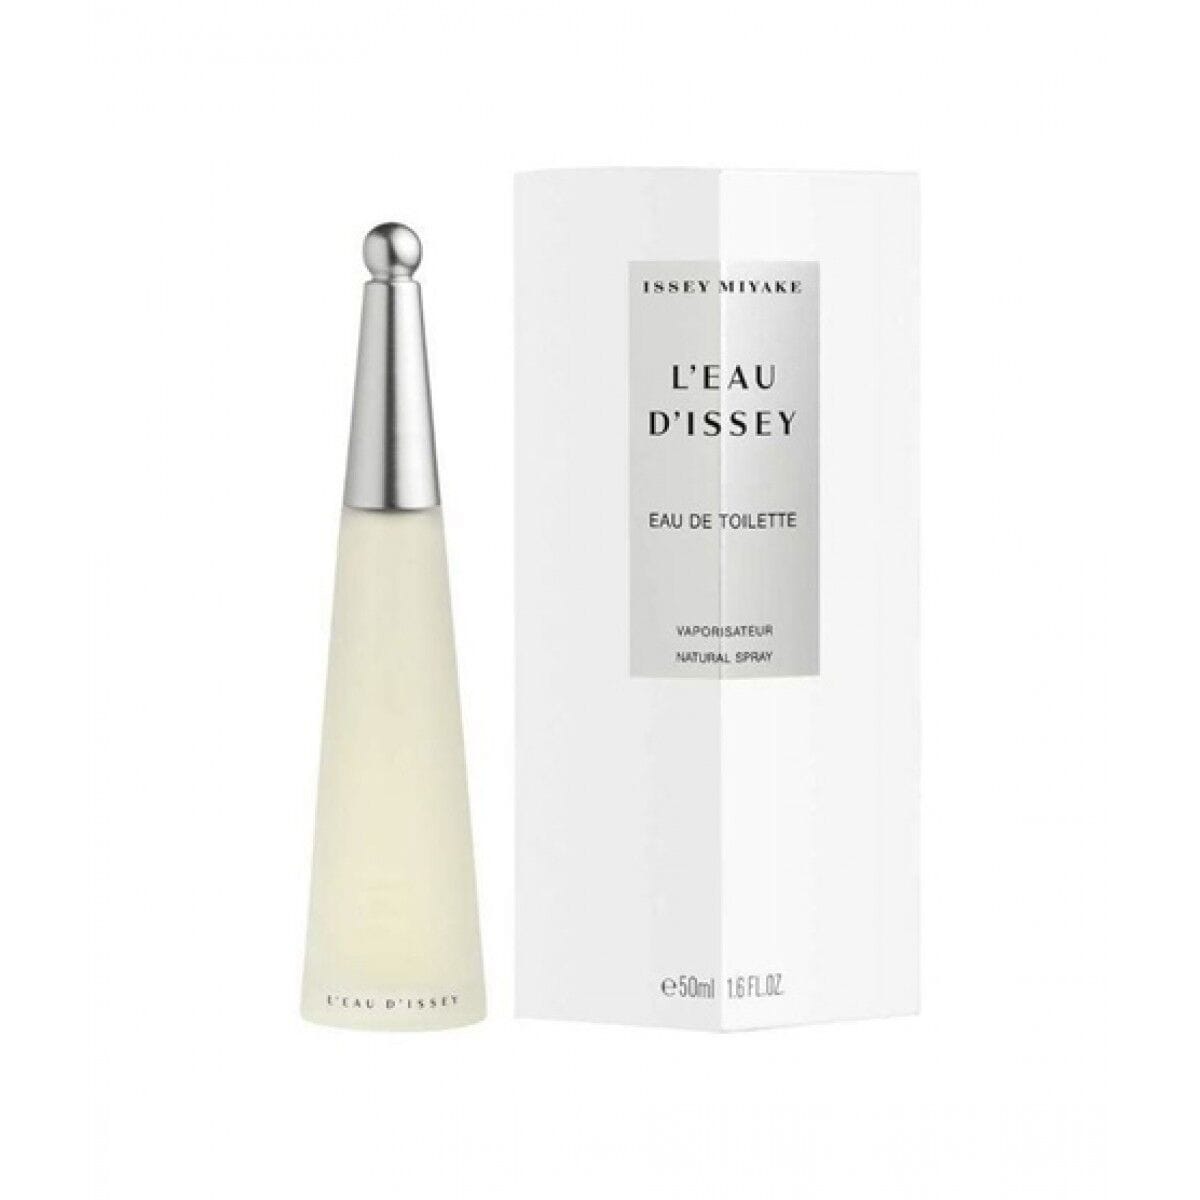 Issey Miyake L'eau D'Issey EDT Perfume For Women